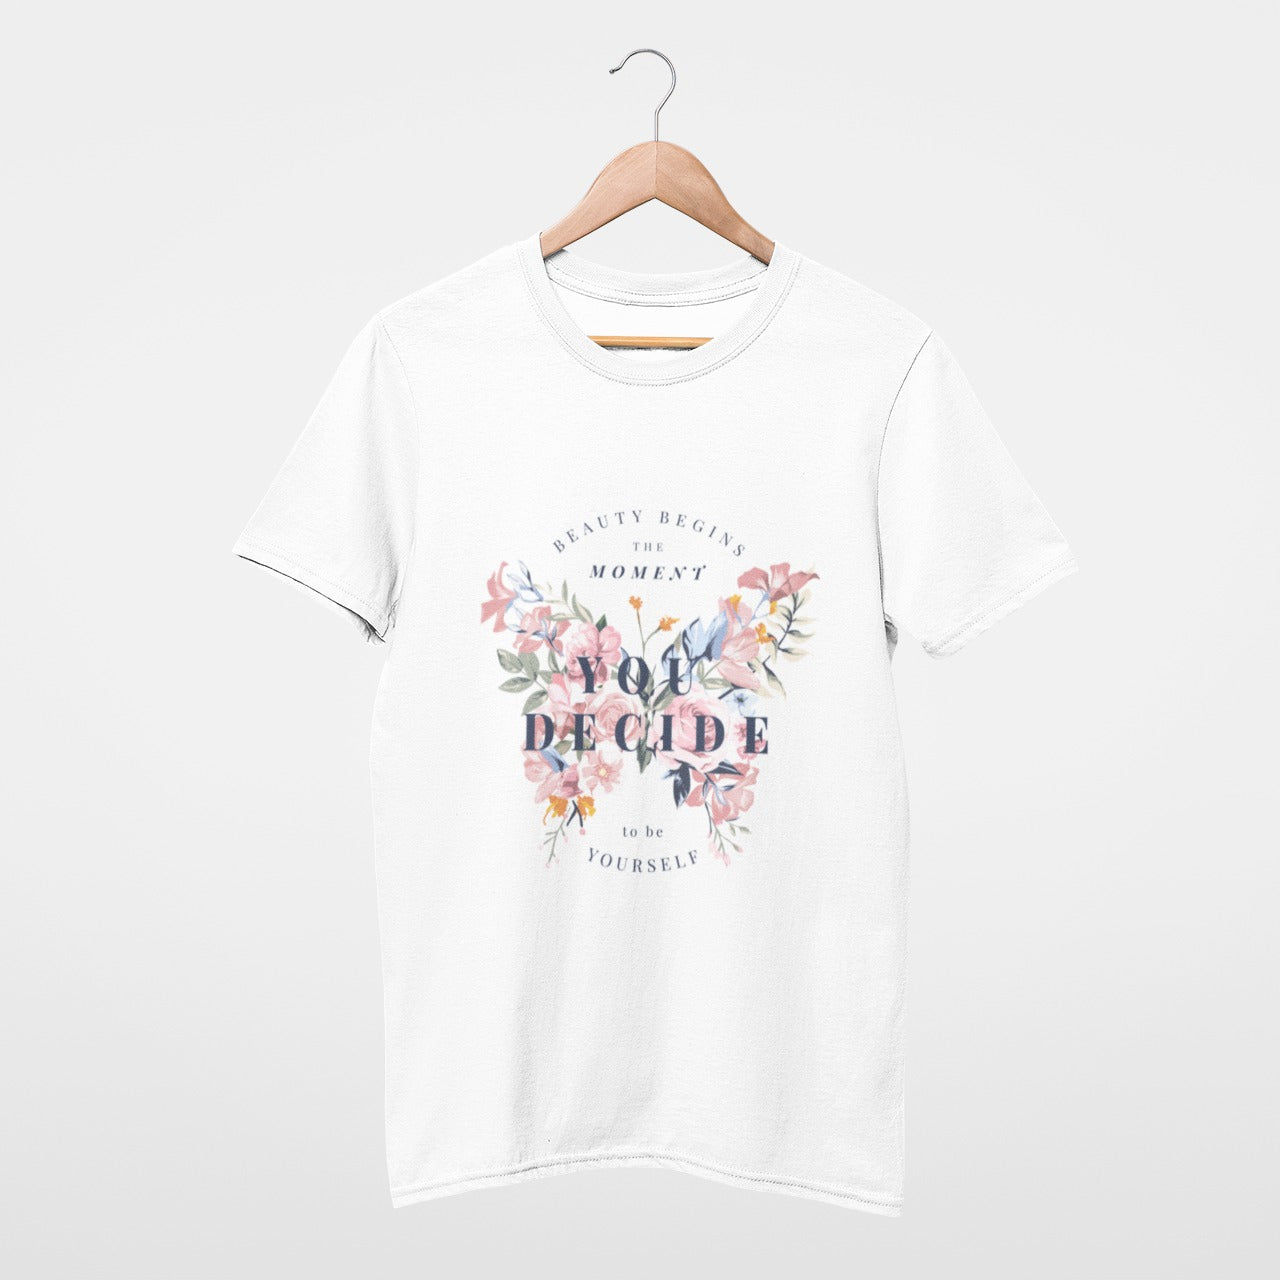 Beauty begins the moment you decide to be yourself Tee